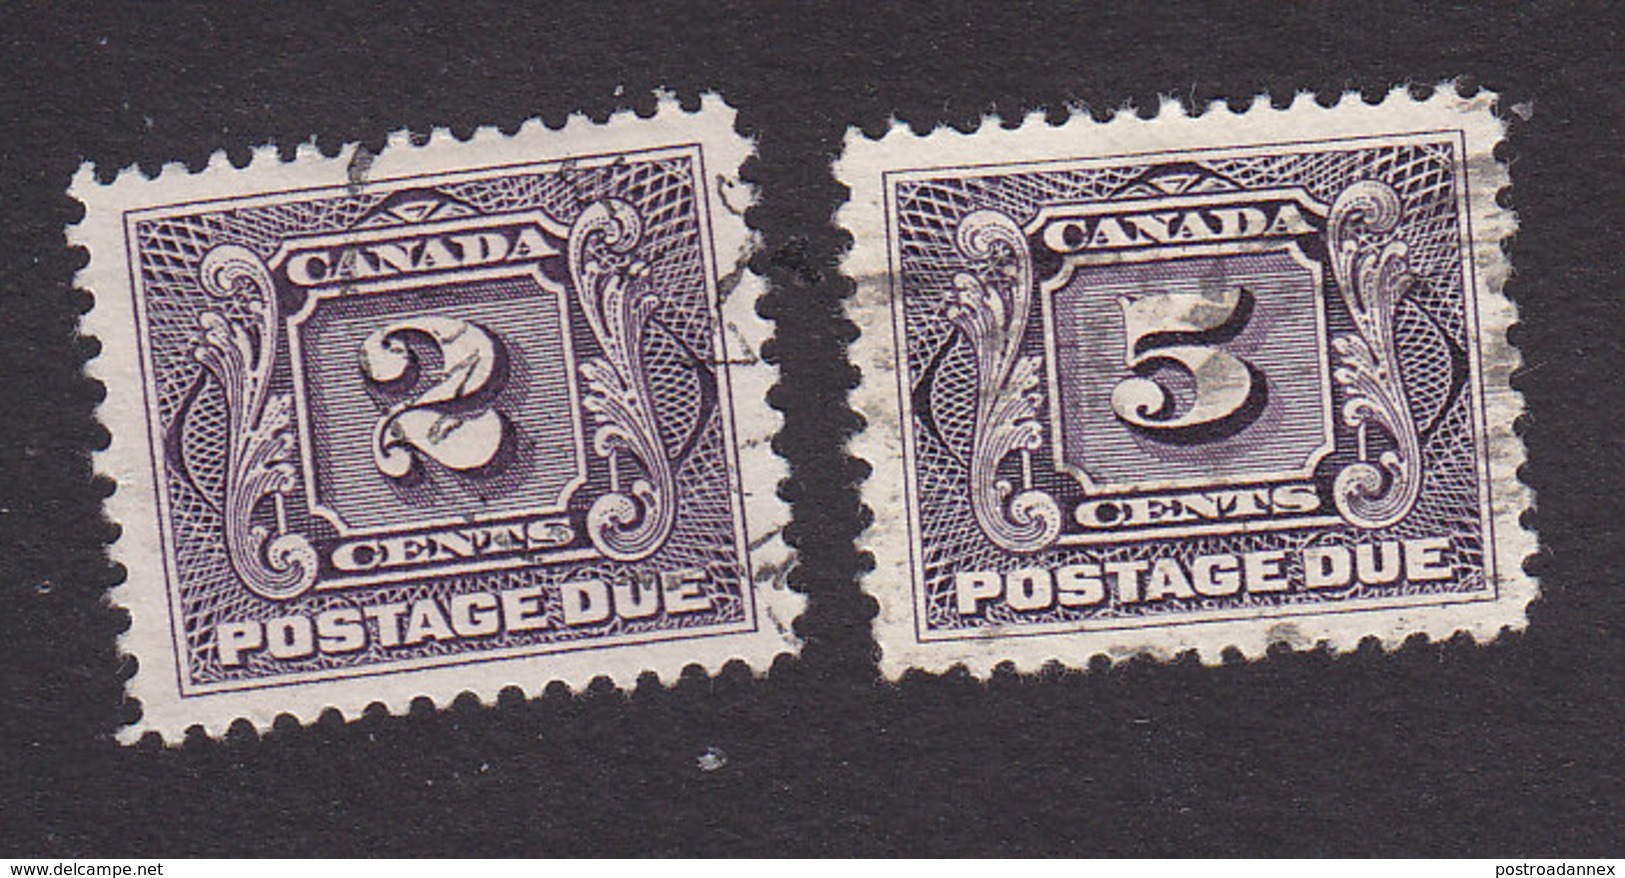 Canada, Scott #J2, J4, Used, Postage Due, Issued 1906 - Port Dû (Taxe)